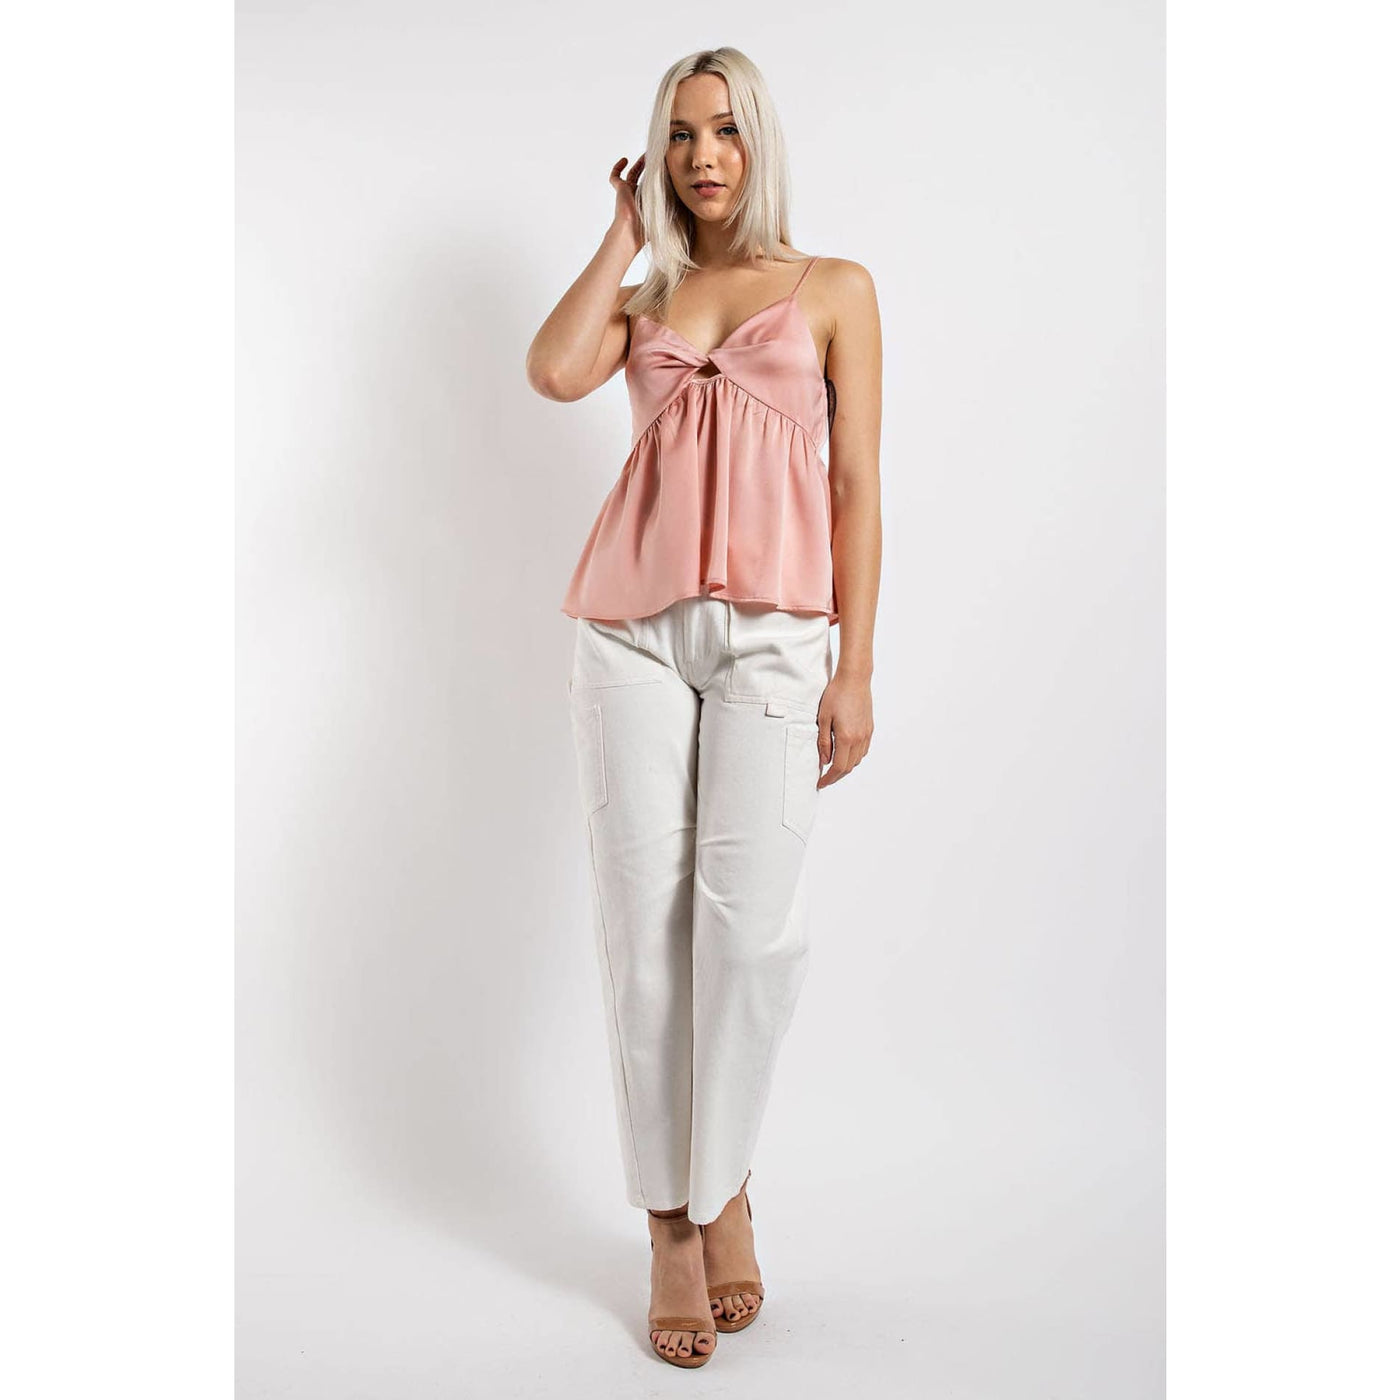 Falling To Pieces Top - S / Blush / 0219 - 100 Short/Sleeveless Tops